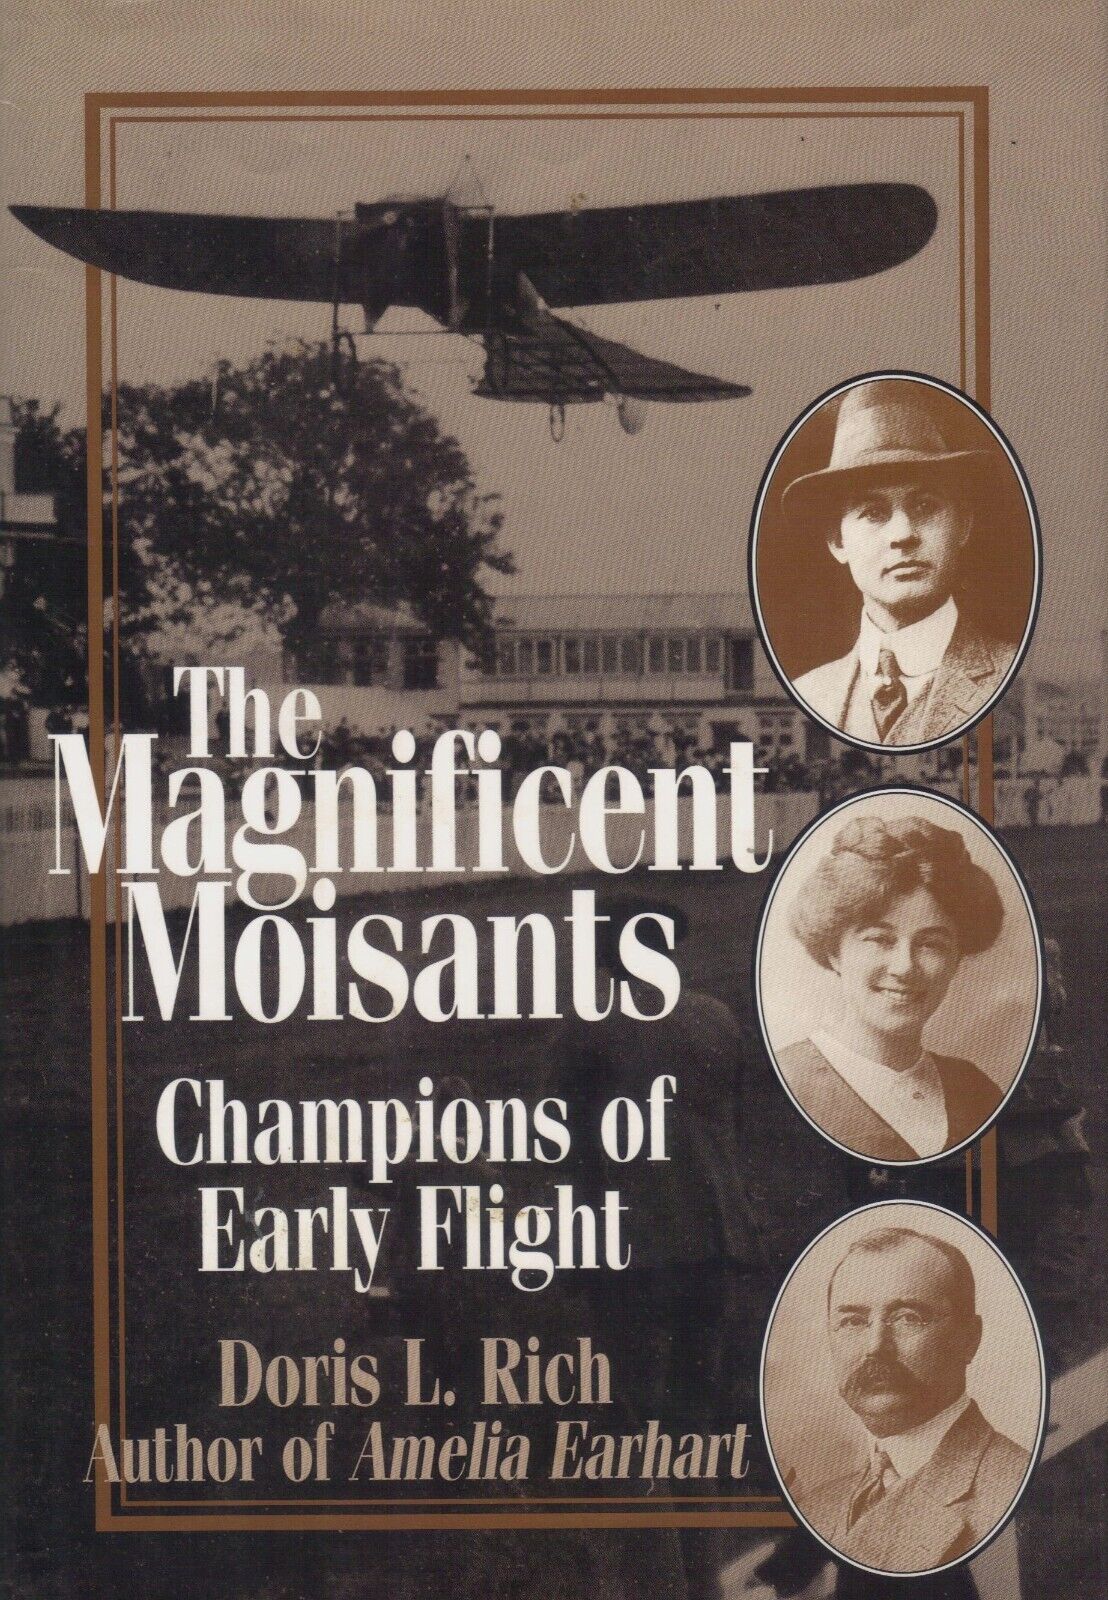 1998 HC Book: iThe Magnificent Moisants, Champions Of Early Flight.. . Mint